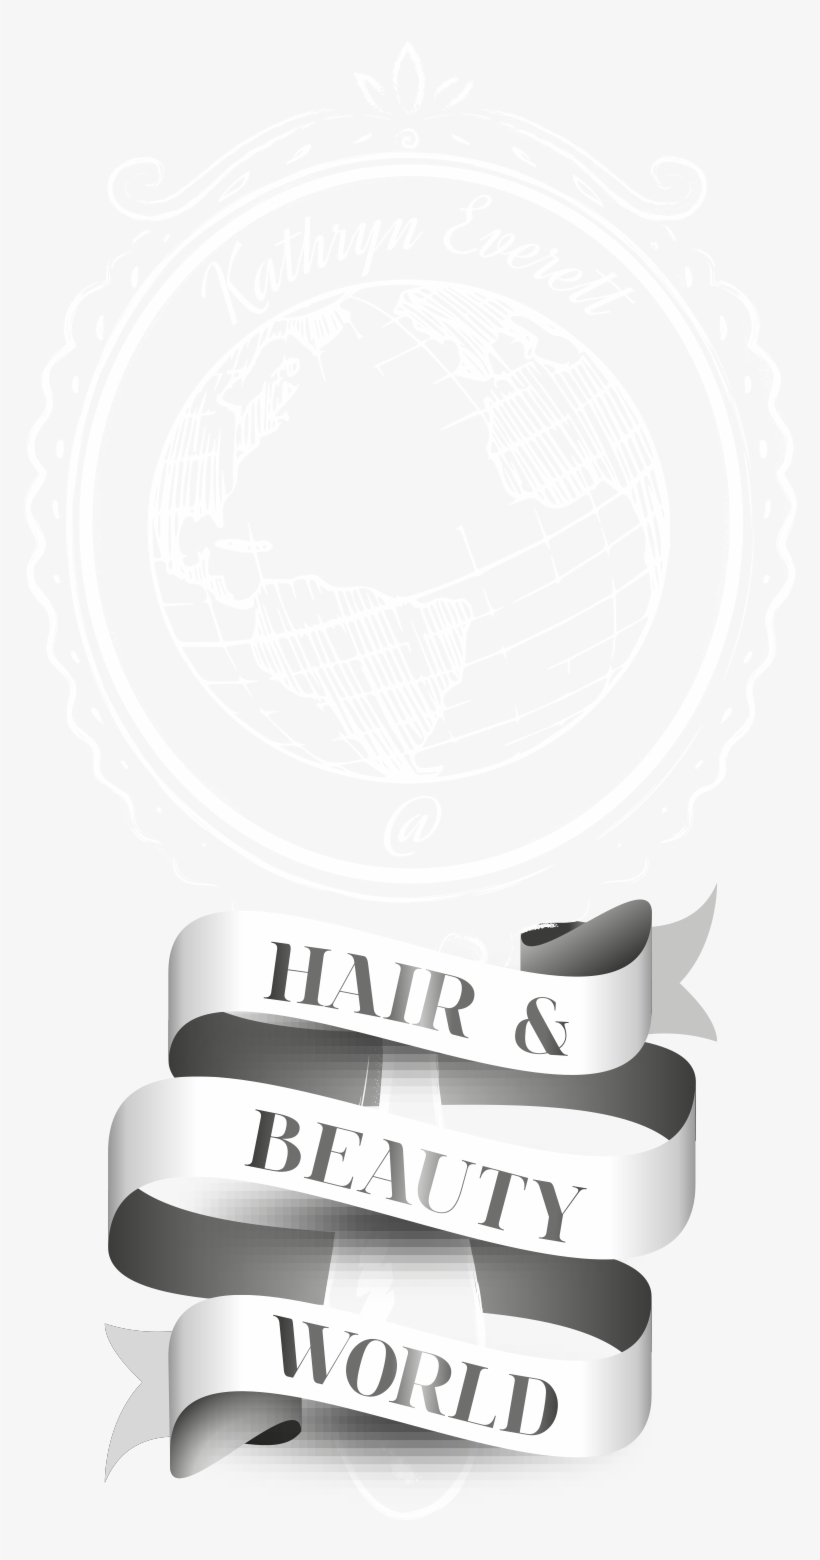 Hair And Beauty World - Graphic Design, transparent png #9366615